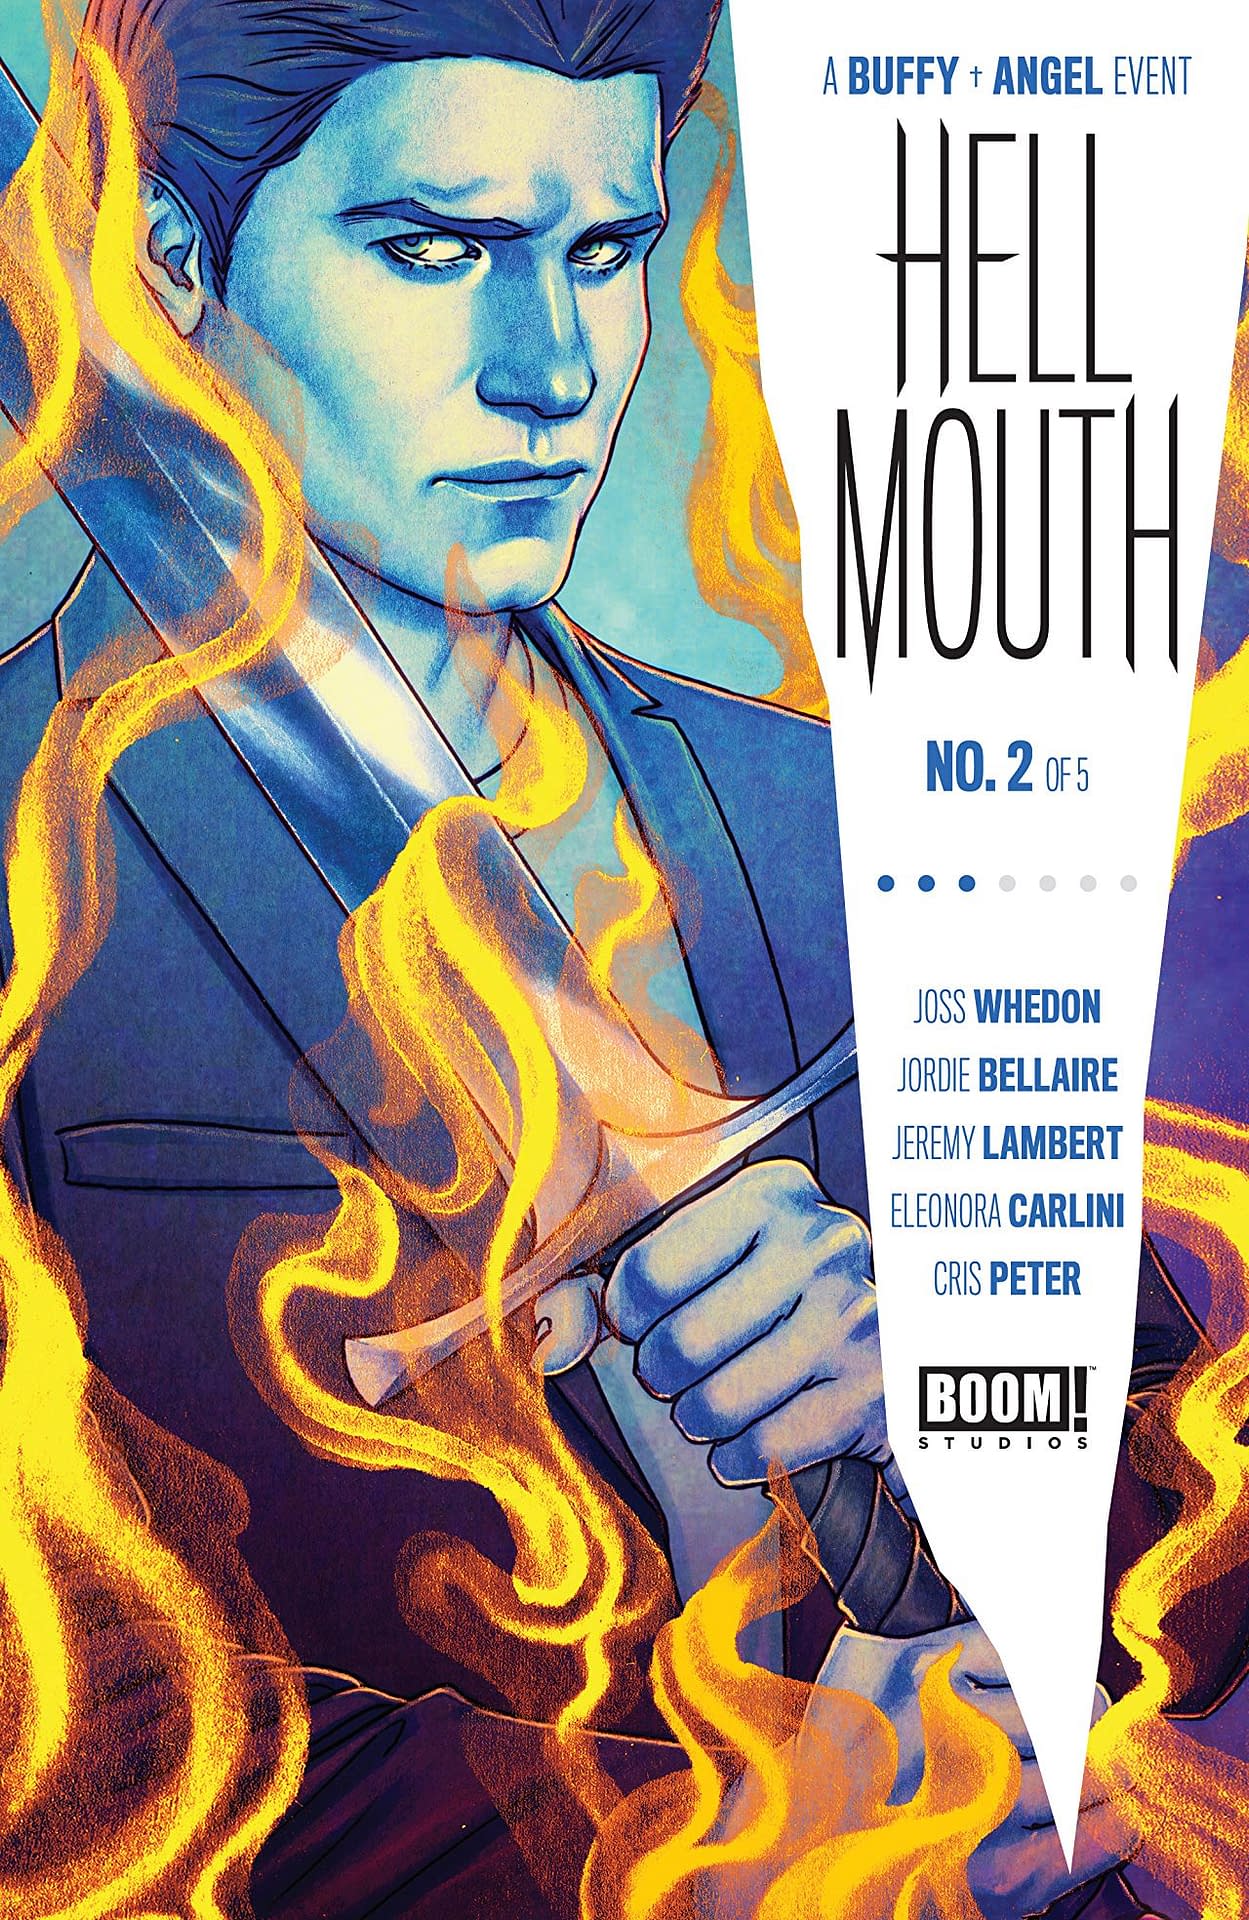 "Hellmouth" #2: Buffy and Angel Team Up to Battle Drusilla